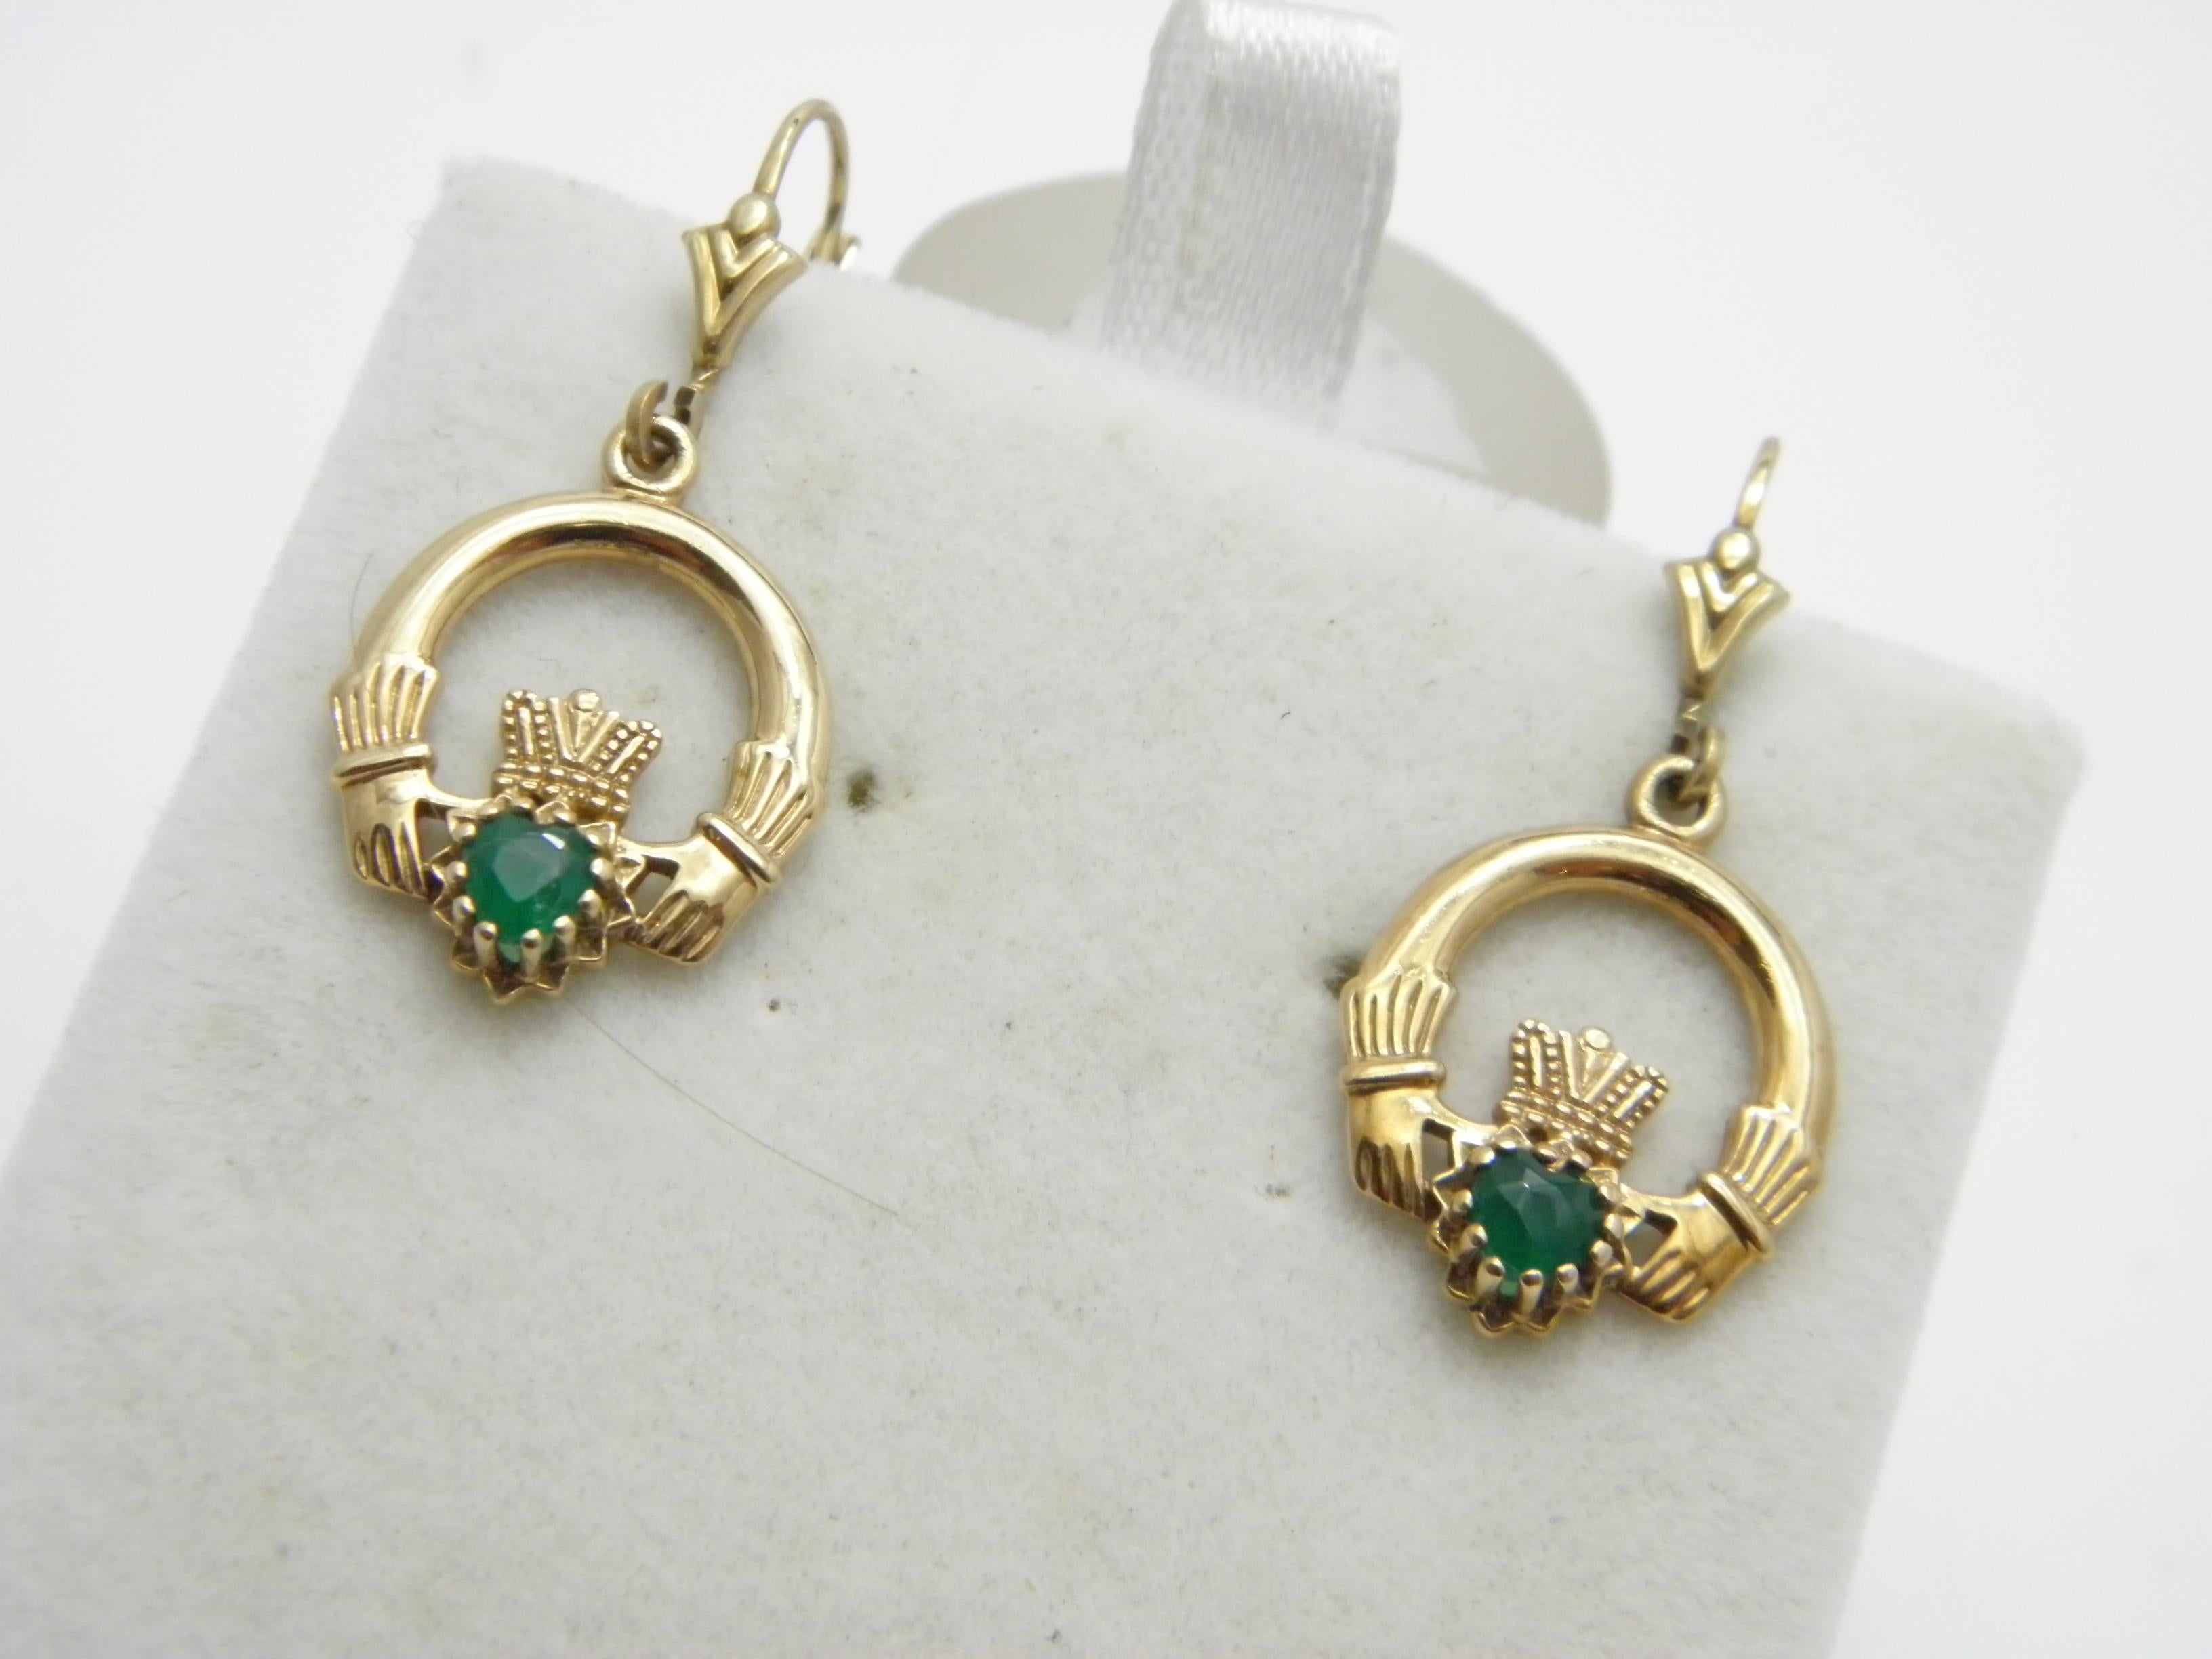 A very special item for you to consider:

9CT HEAVY GOLD EMERALD CLADDAGH LARGE DROP / DANGLE EARRINGS

DETAILS
Material: 375/1000 9ct Solid Gold
Style: Detailed drop / dangle earrings with classic Claddagh design
Gems: Heart cut natural Emerald set